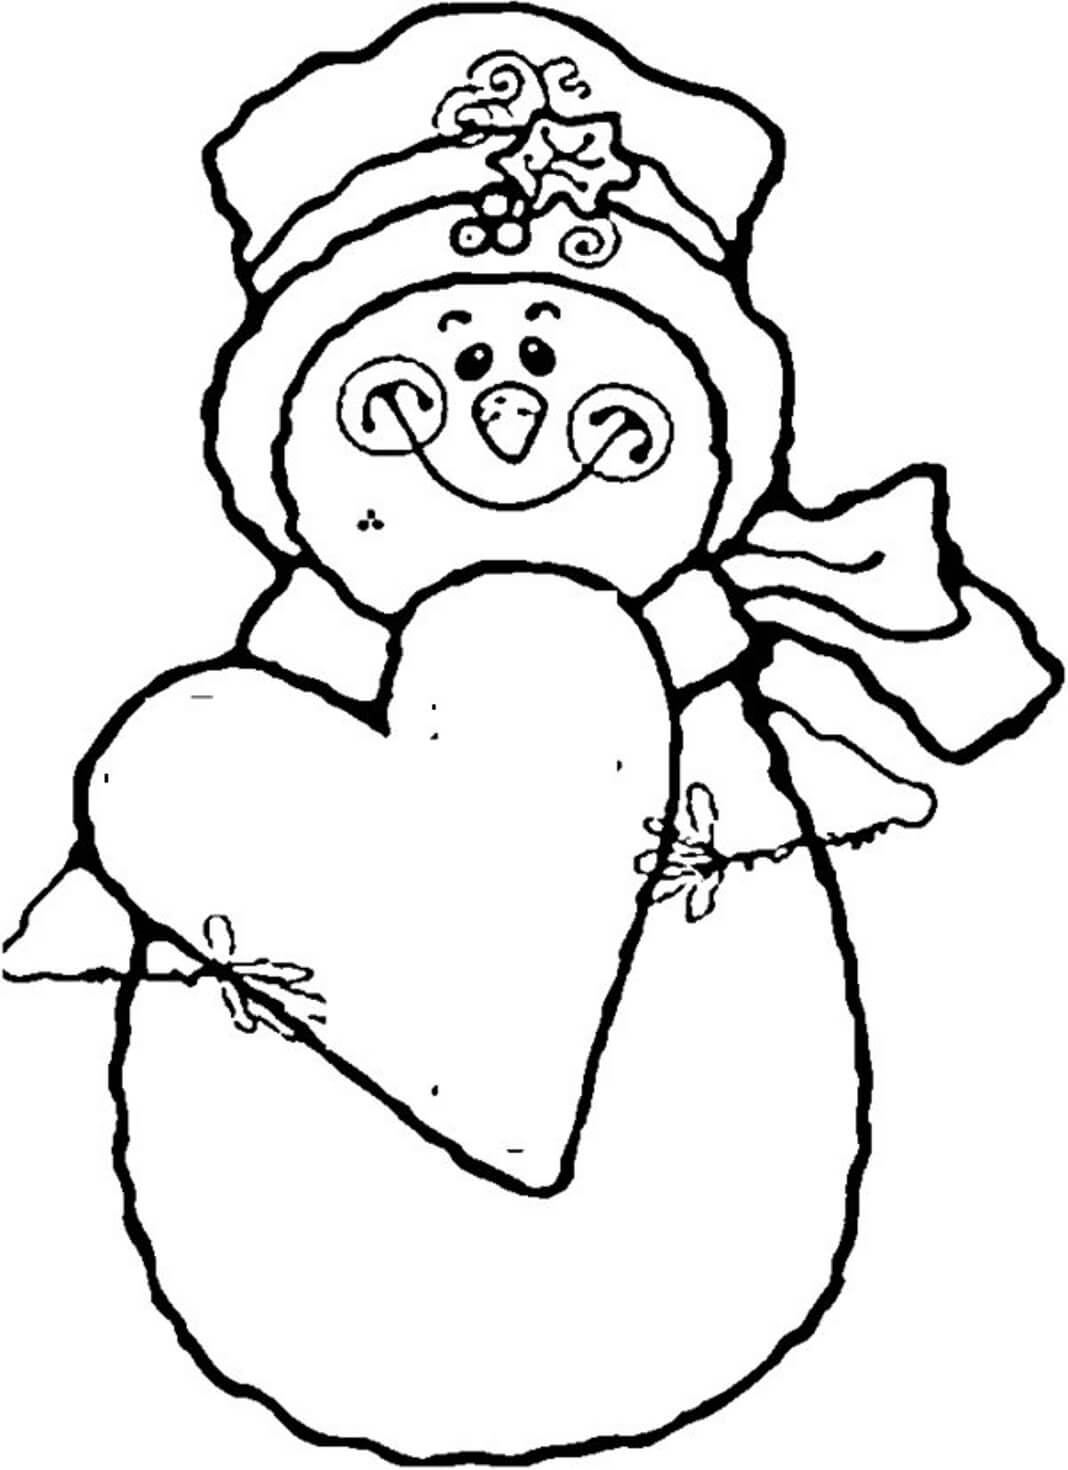 Snowman Heart Coloring Pages